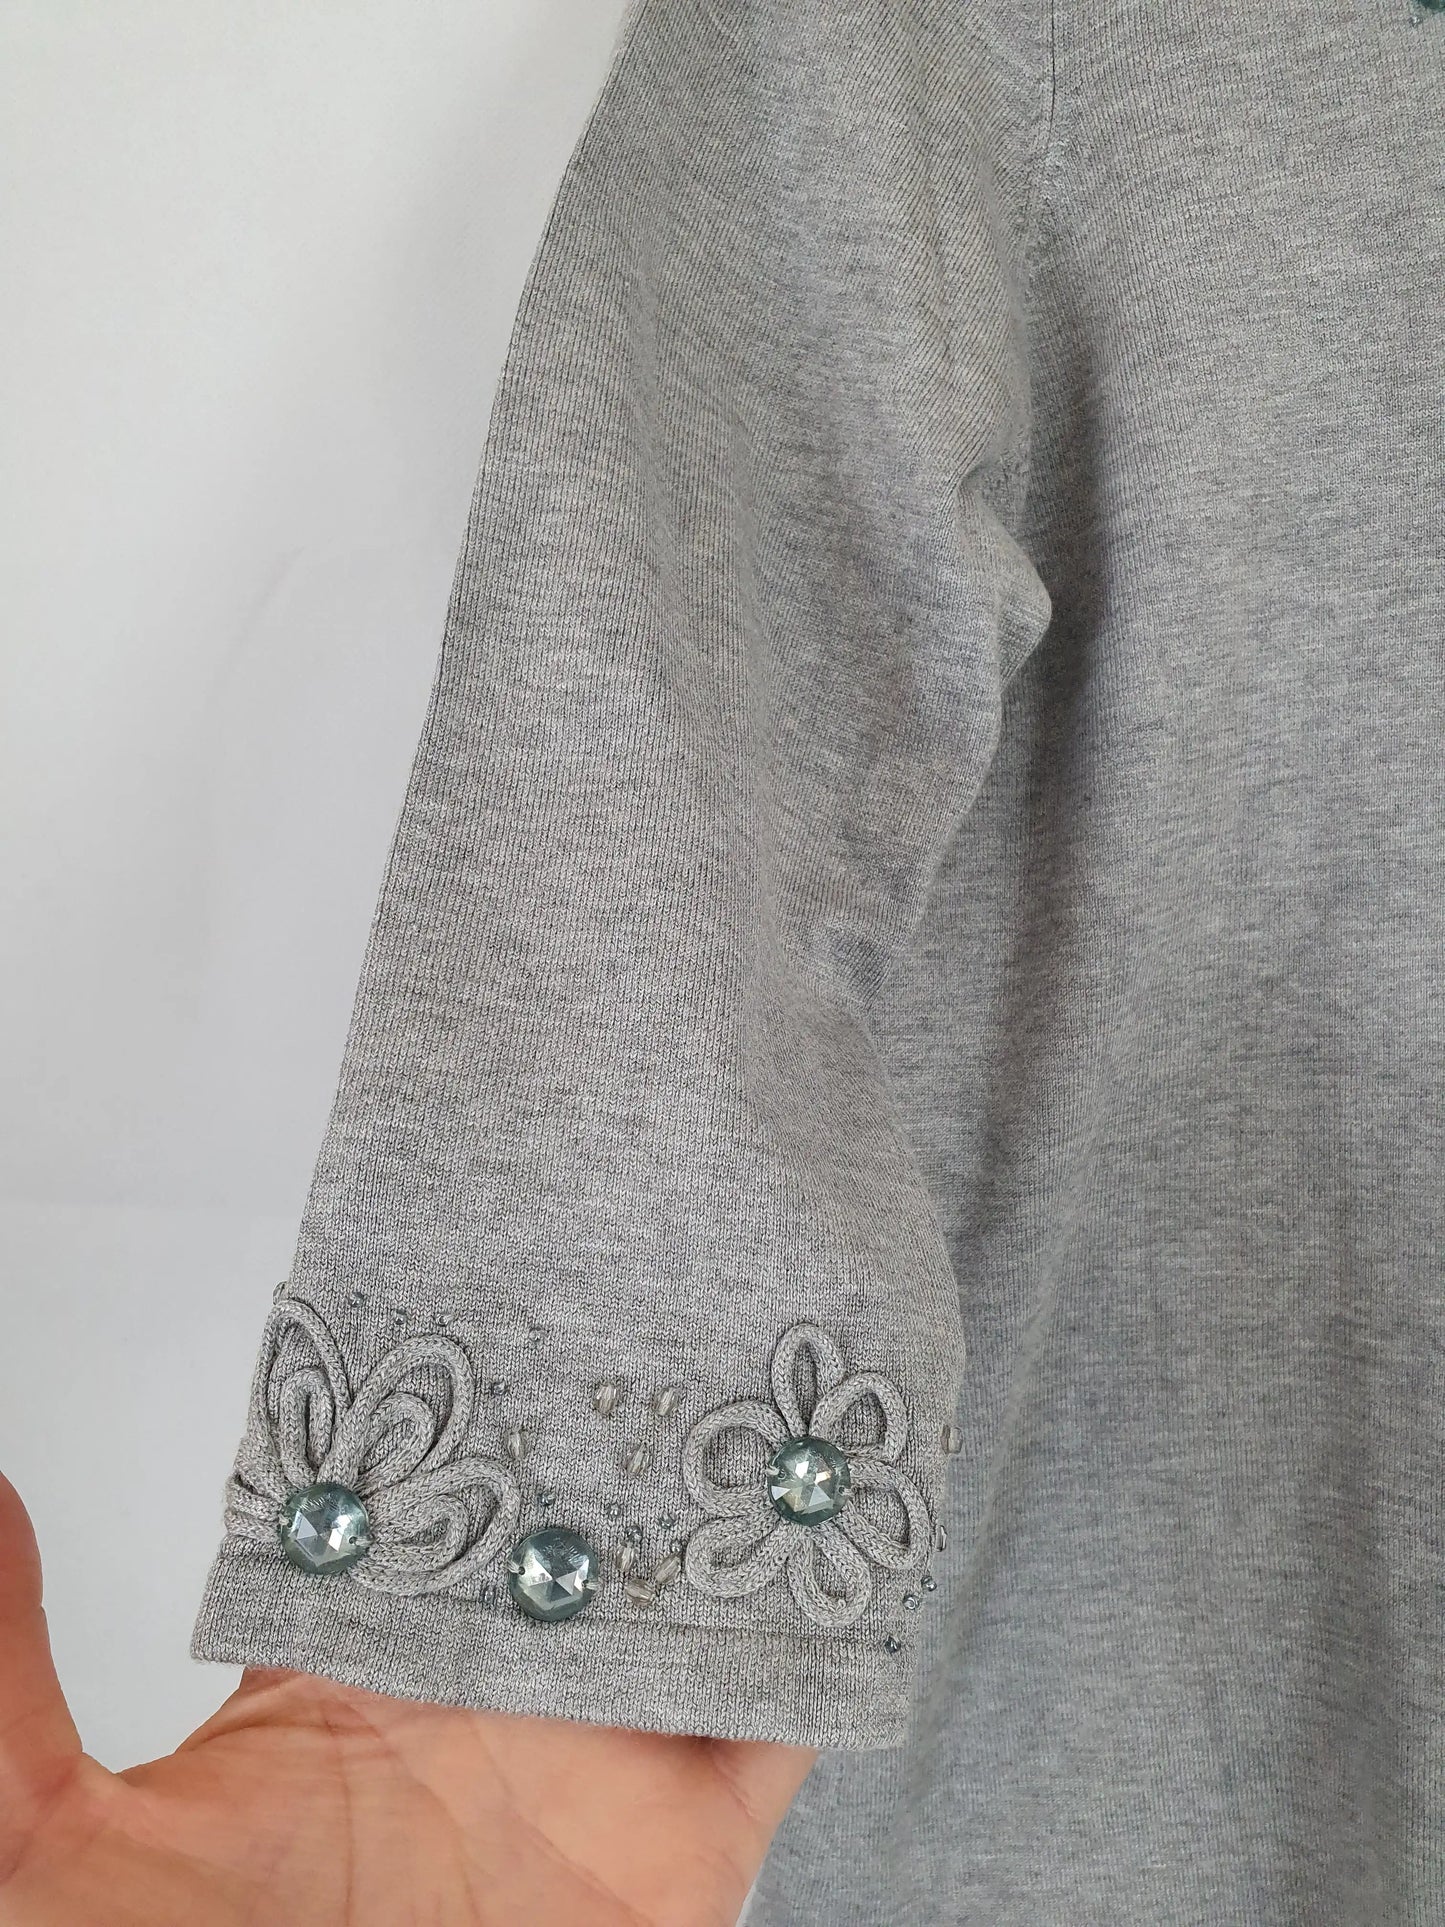 Wombat Floral Embellished Top Size L by SwapUp-Second Hand Shop-Thrift Store-Op Shop 